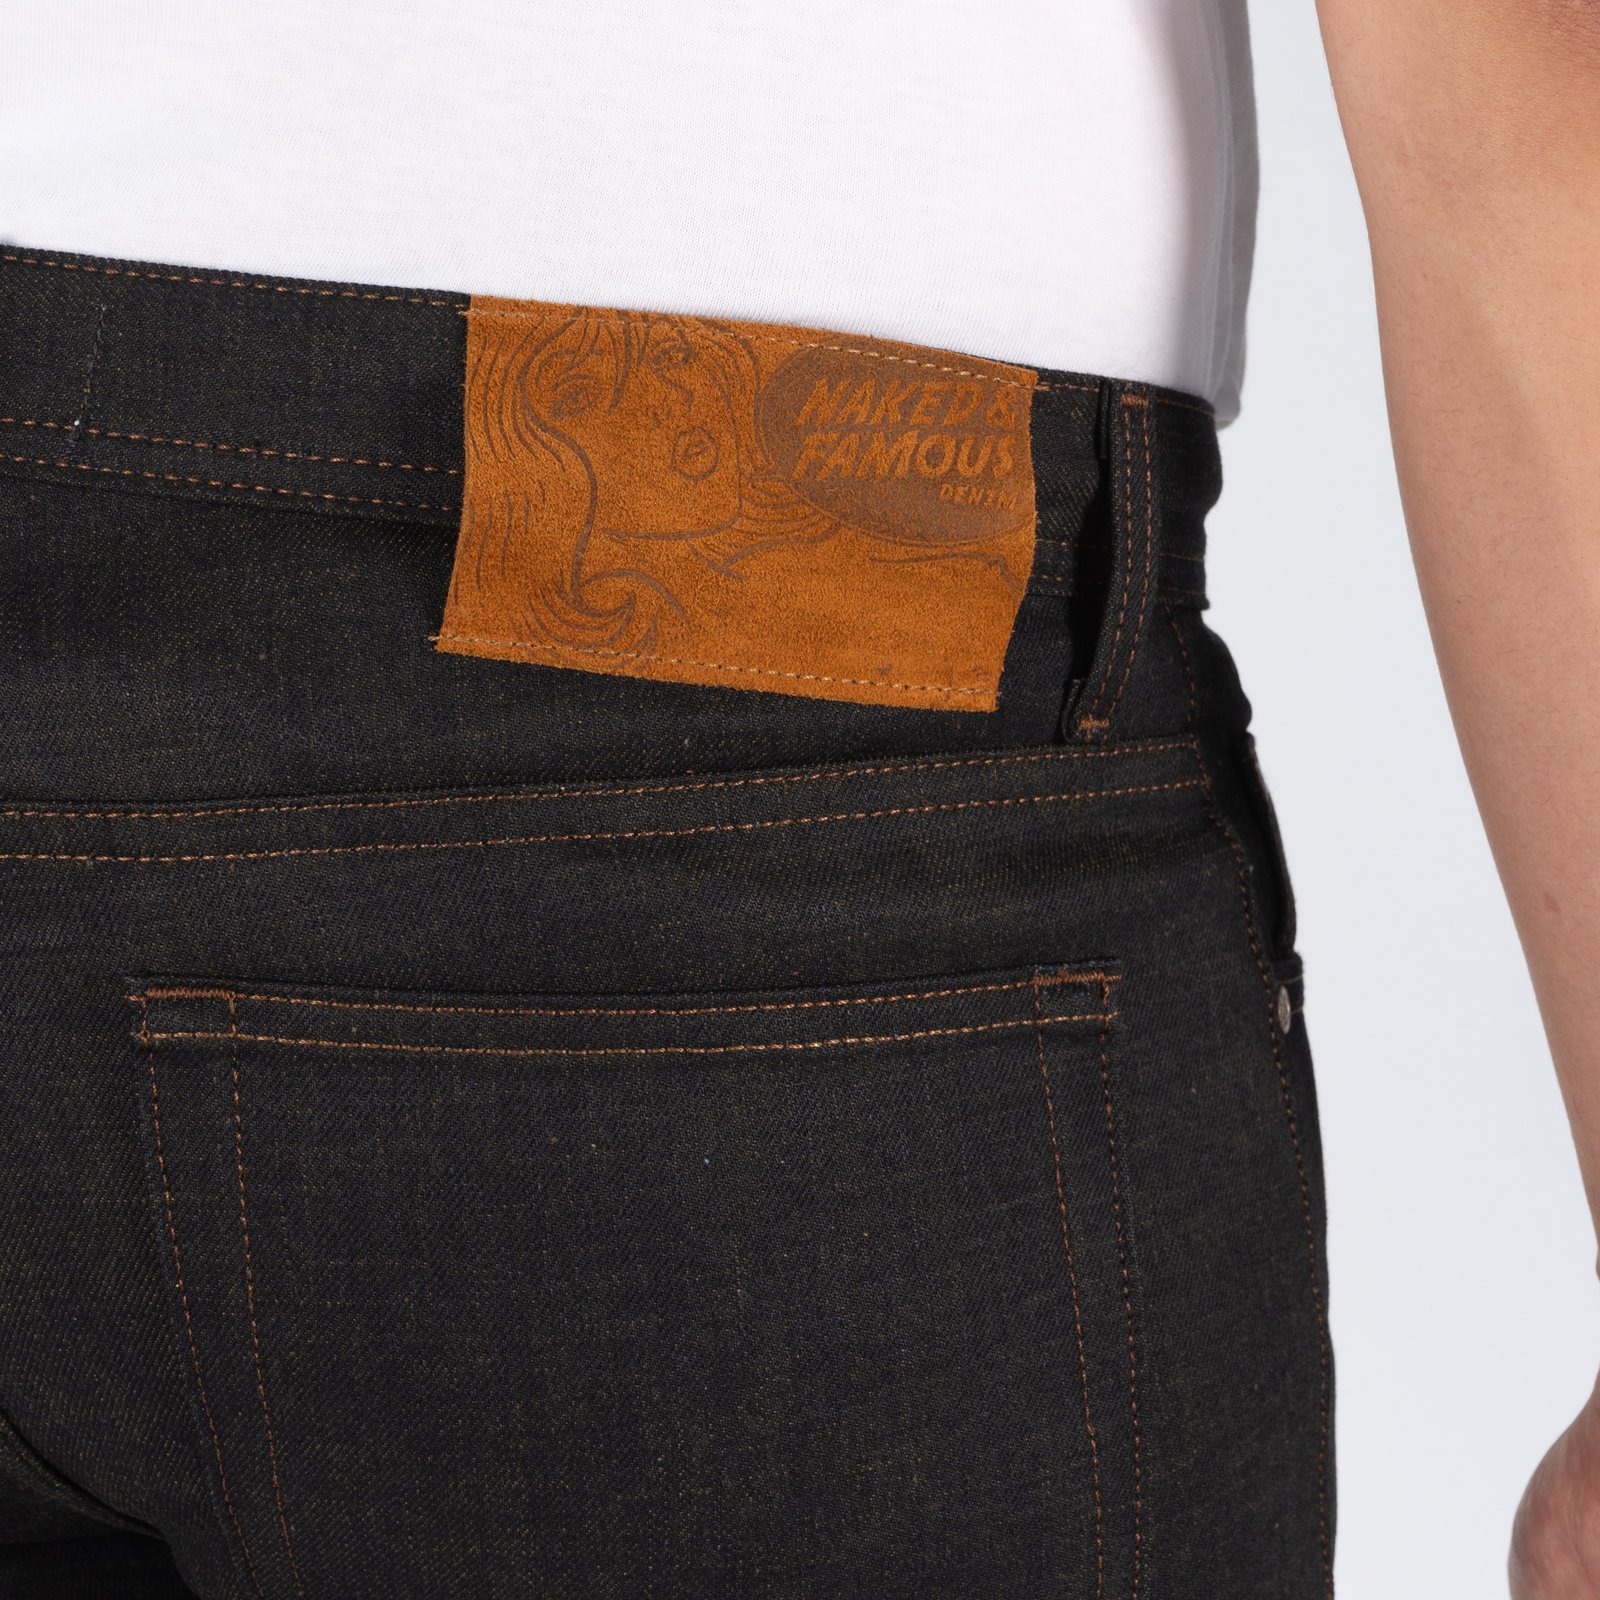  Catechu Selvedge jeans - leather patch 